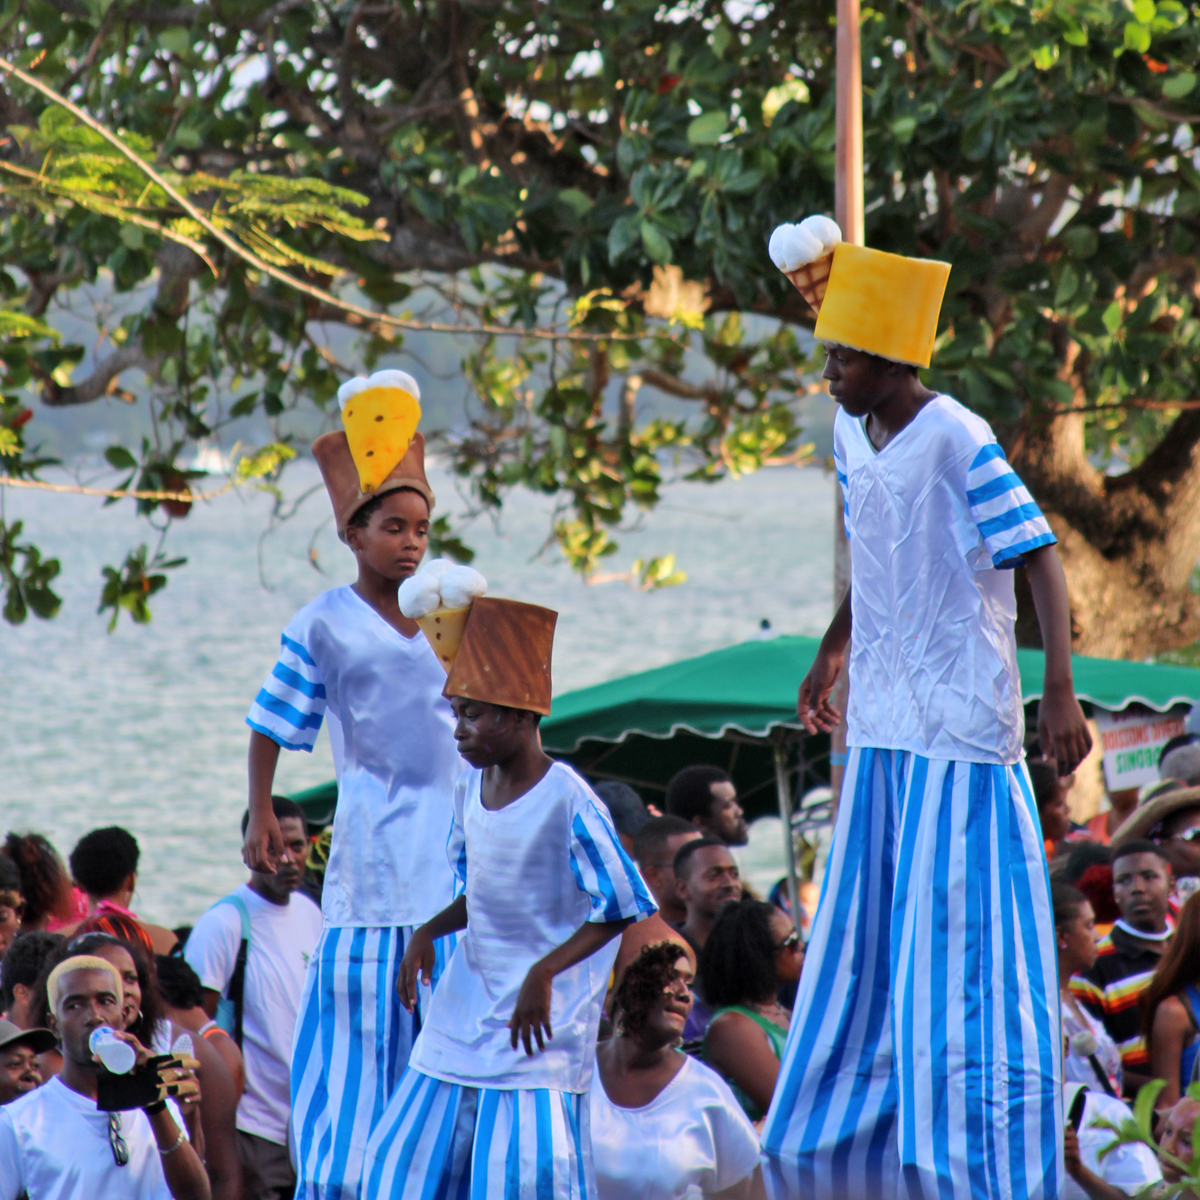 Stilt walkers at the South Martinique carnival parade